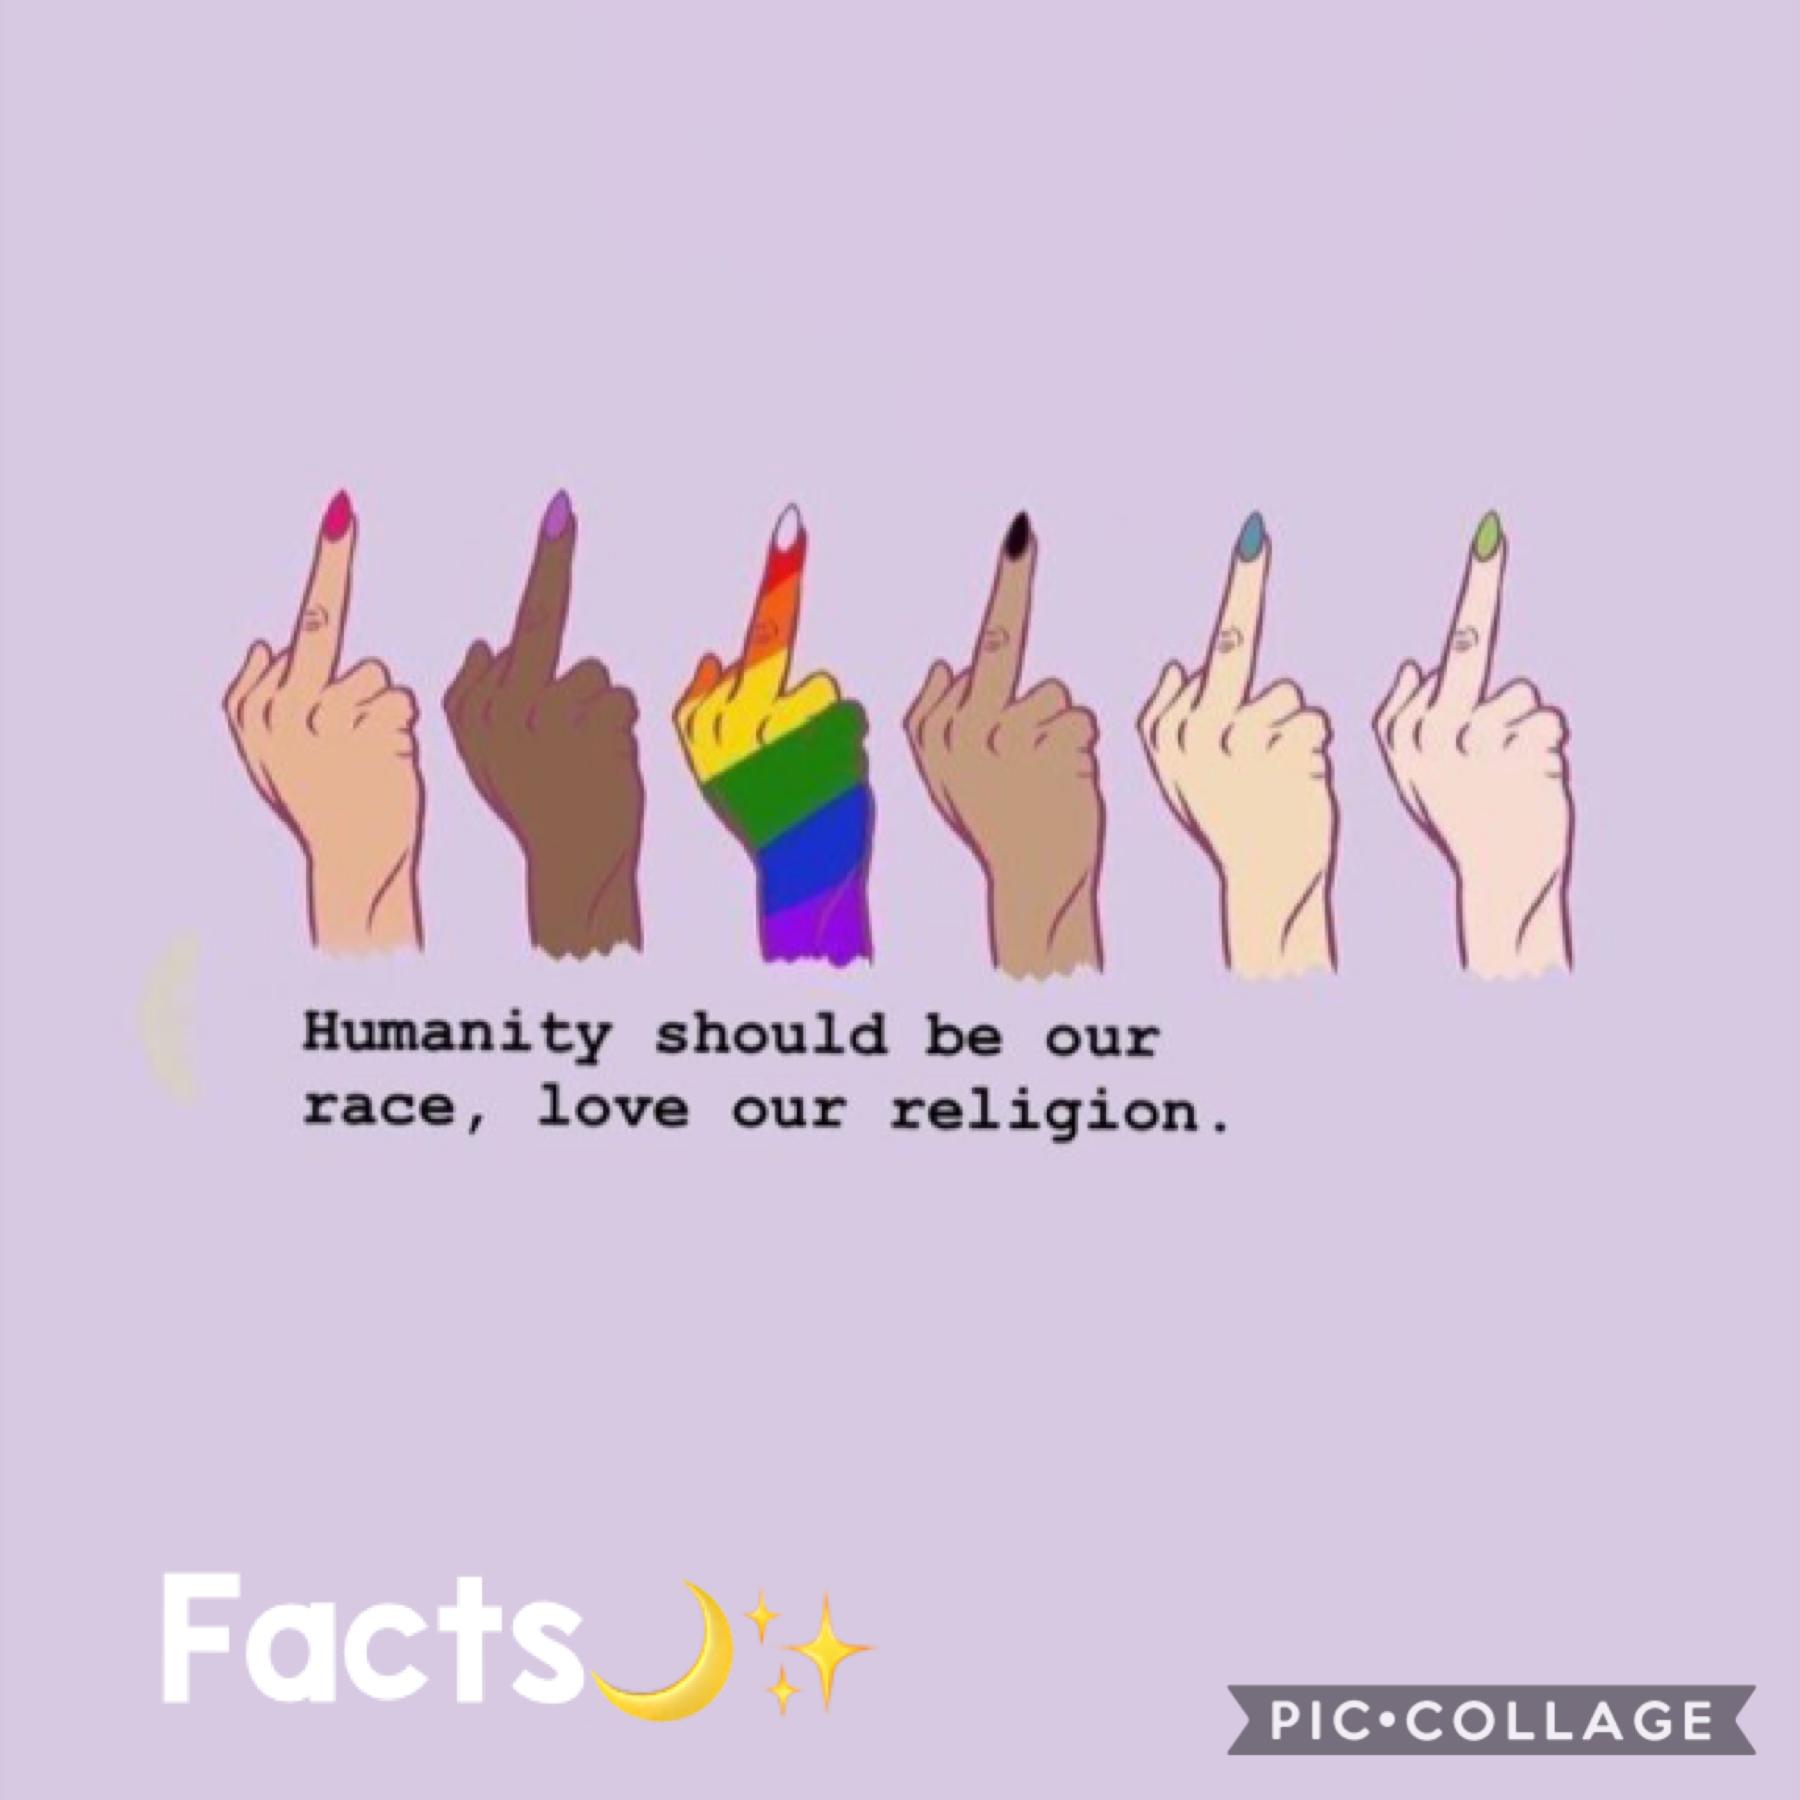 I'm not trying to show the fact about the middle finger just about race. Stay safe!❤️💋